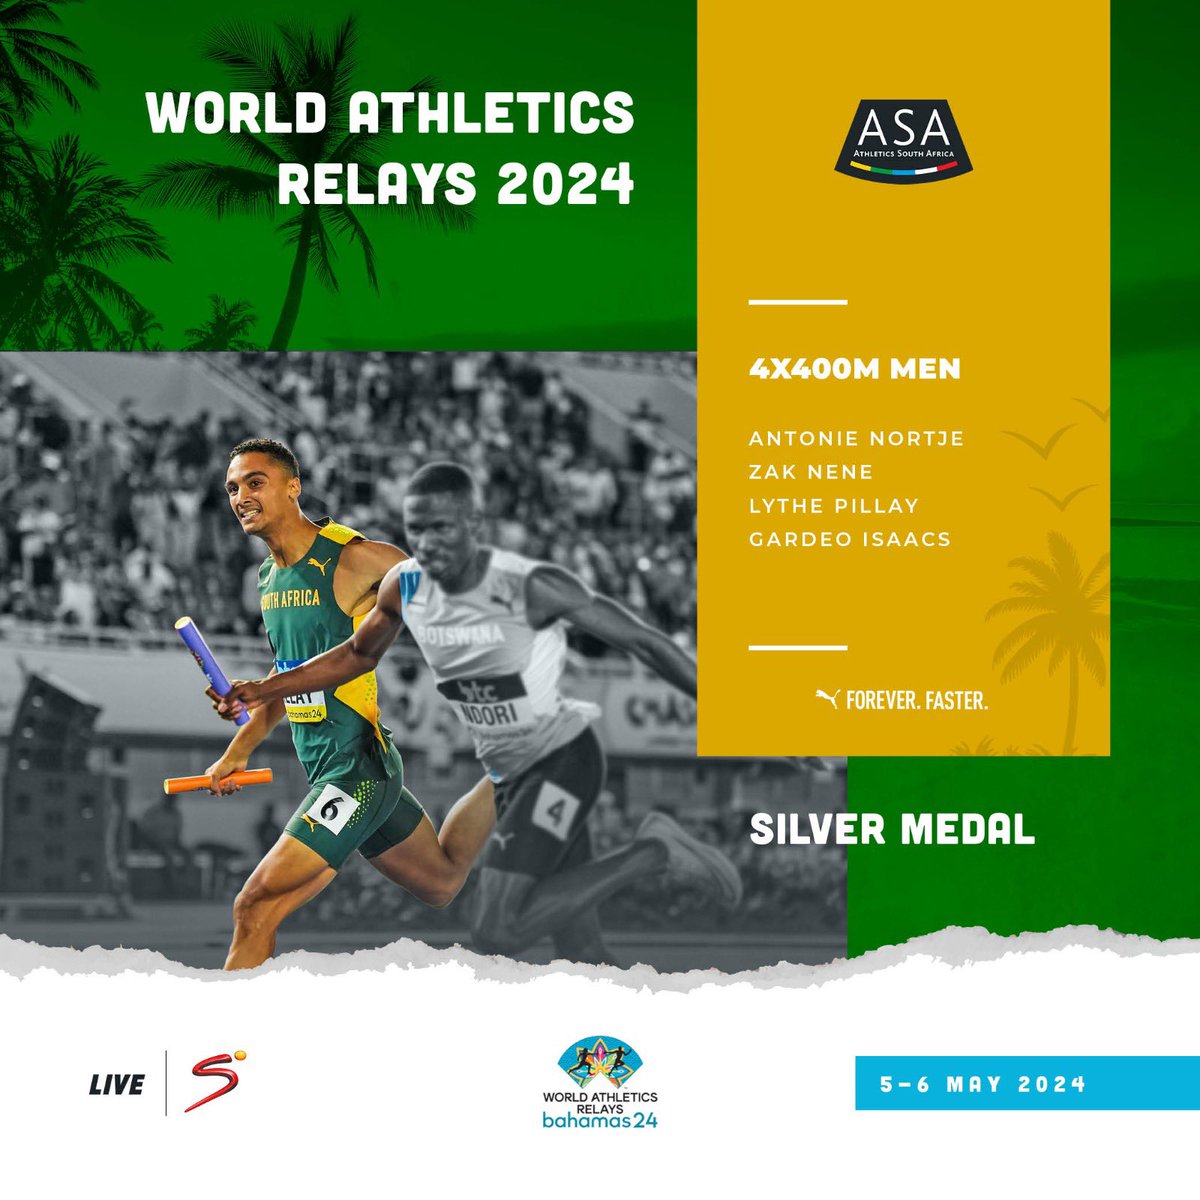 Awesome effort by the SA 4x400m team, taking the silver medal at the World Relays 🥈 🇿🇦 And they’ve qualified for the Paris Olympics! #Worldrelays #RoadToOlympics #TeamSA